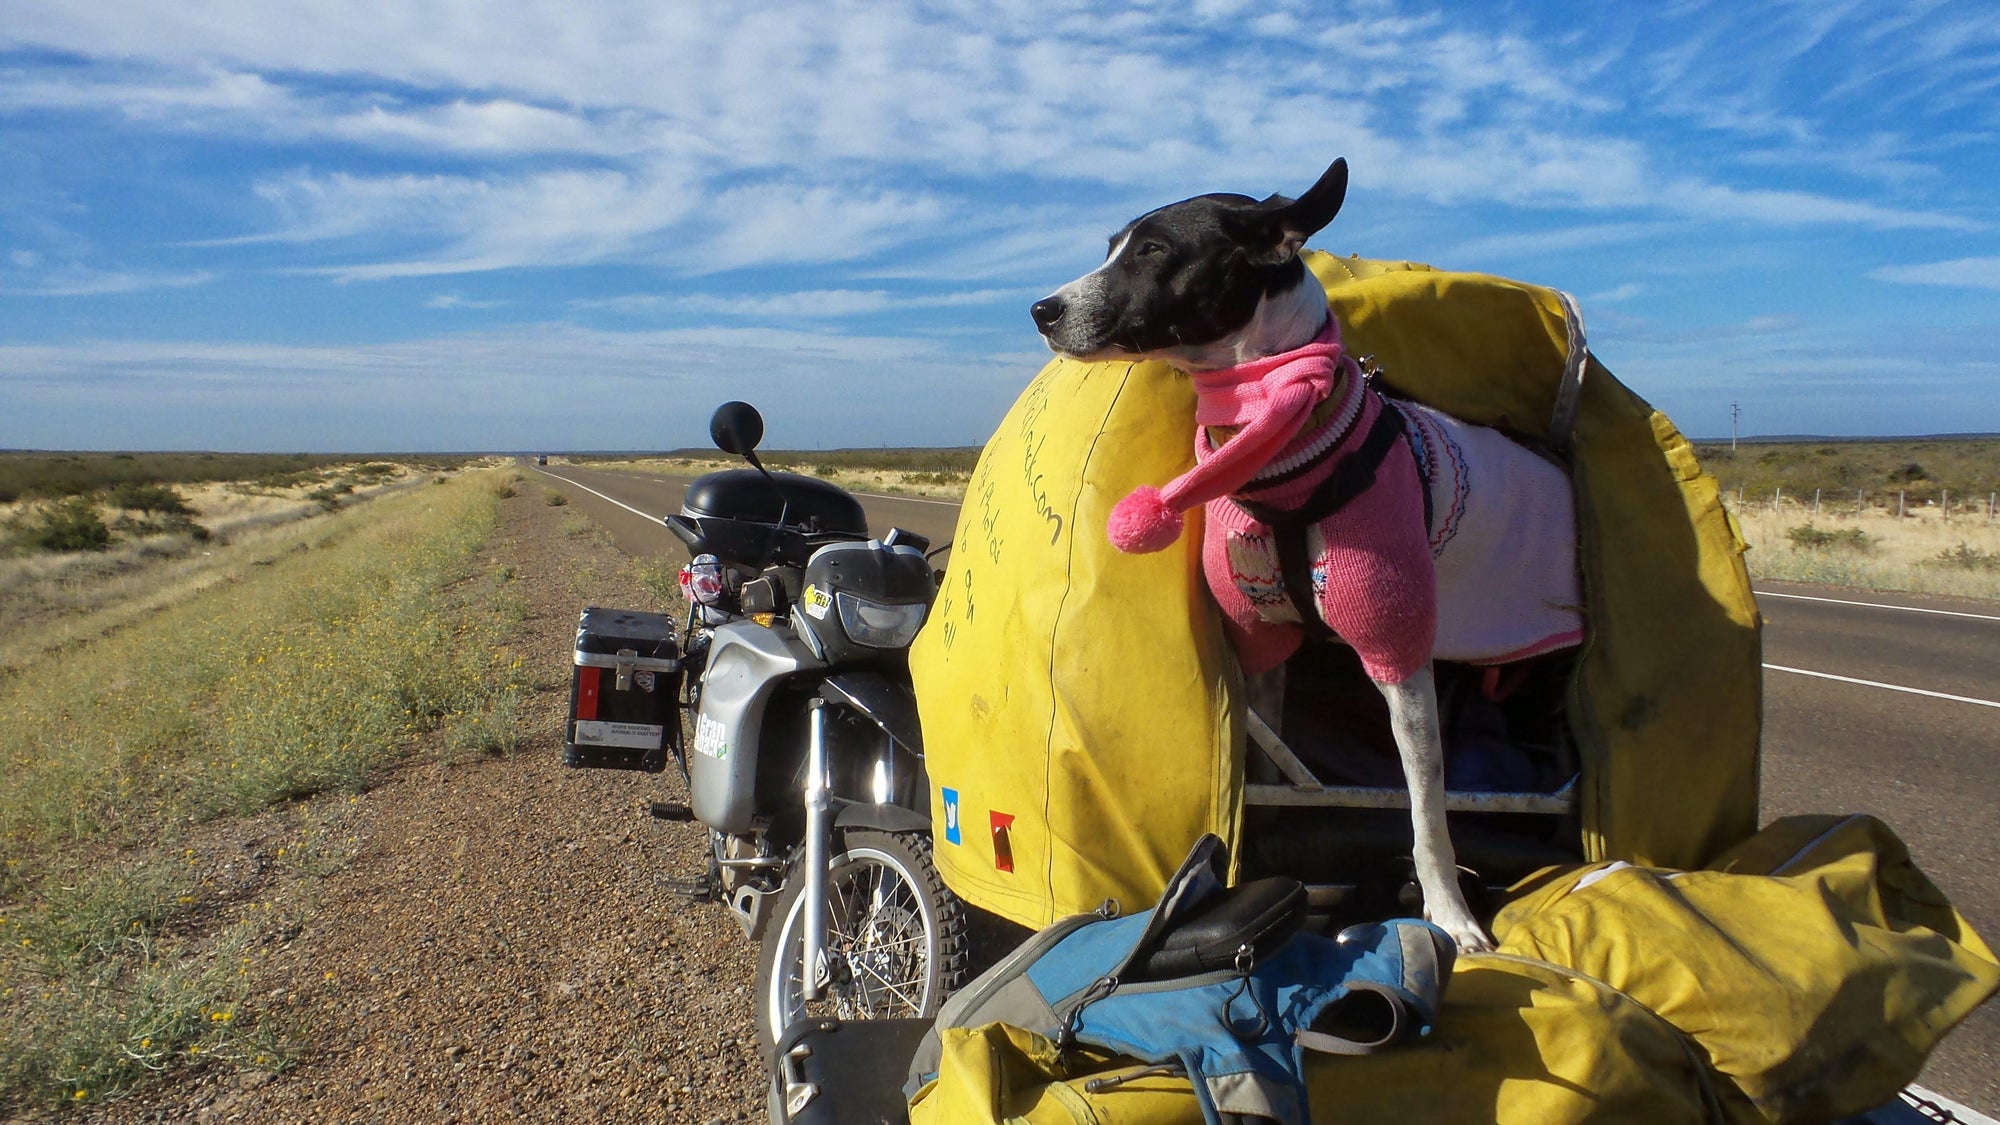 Weeti riding south in Argentina, 2015